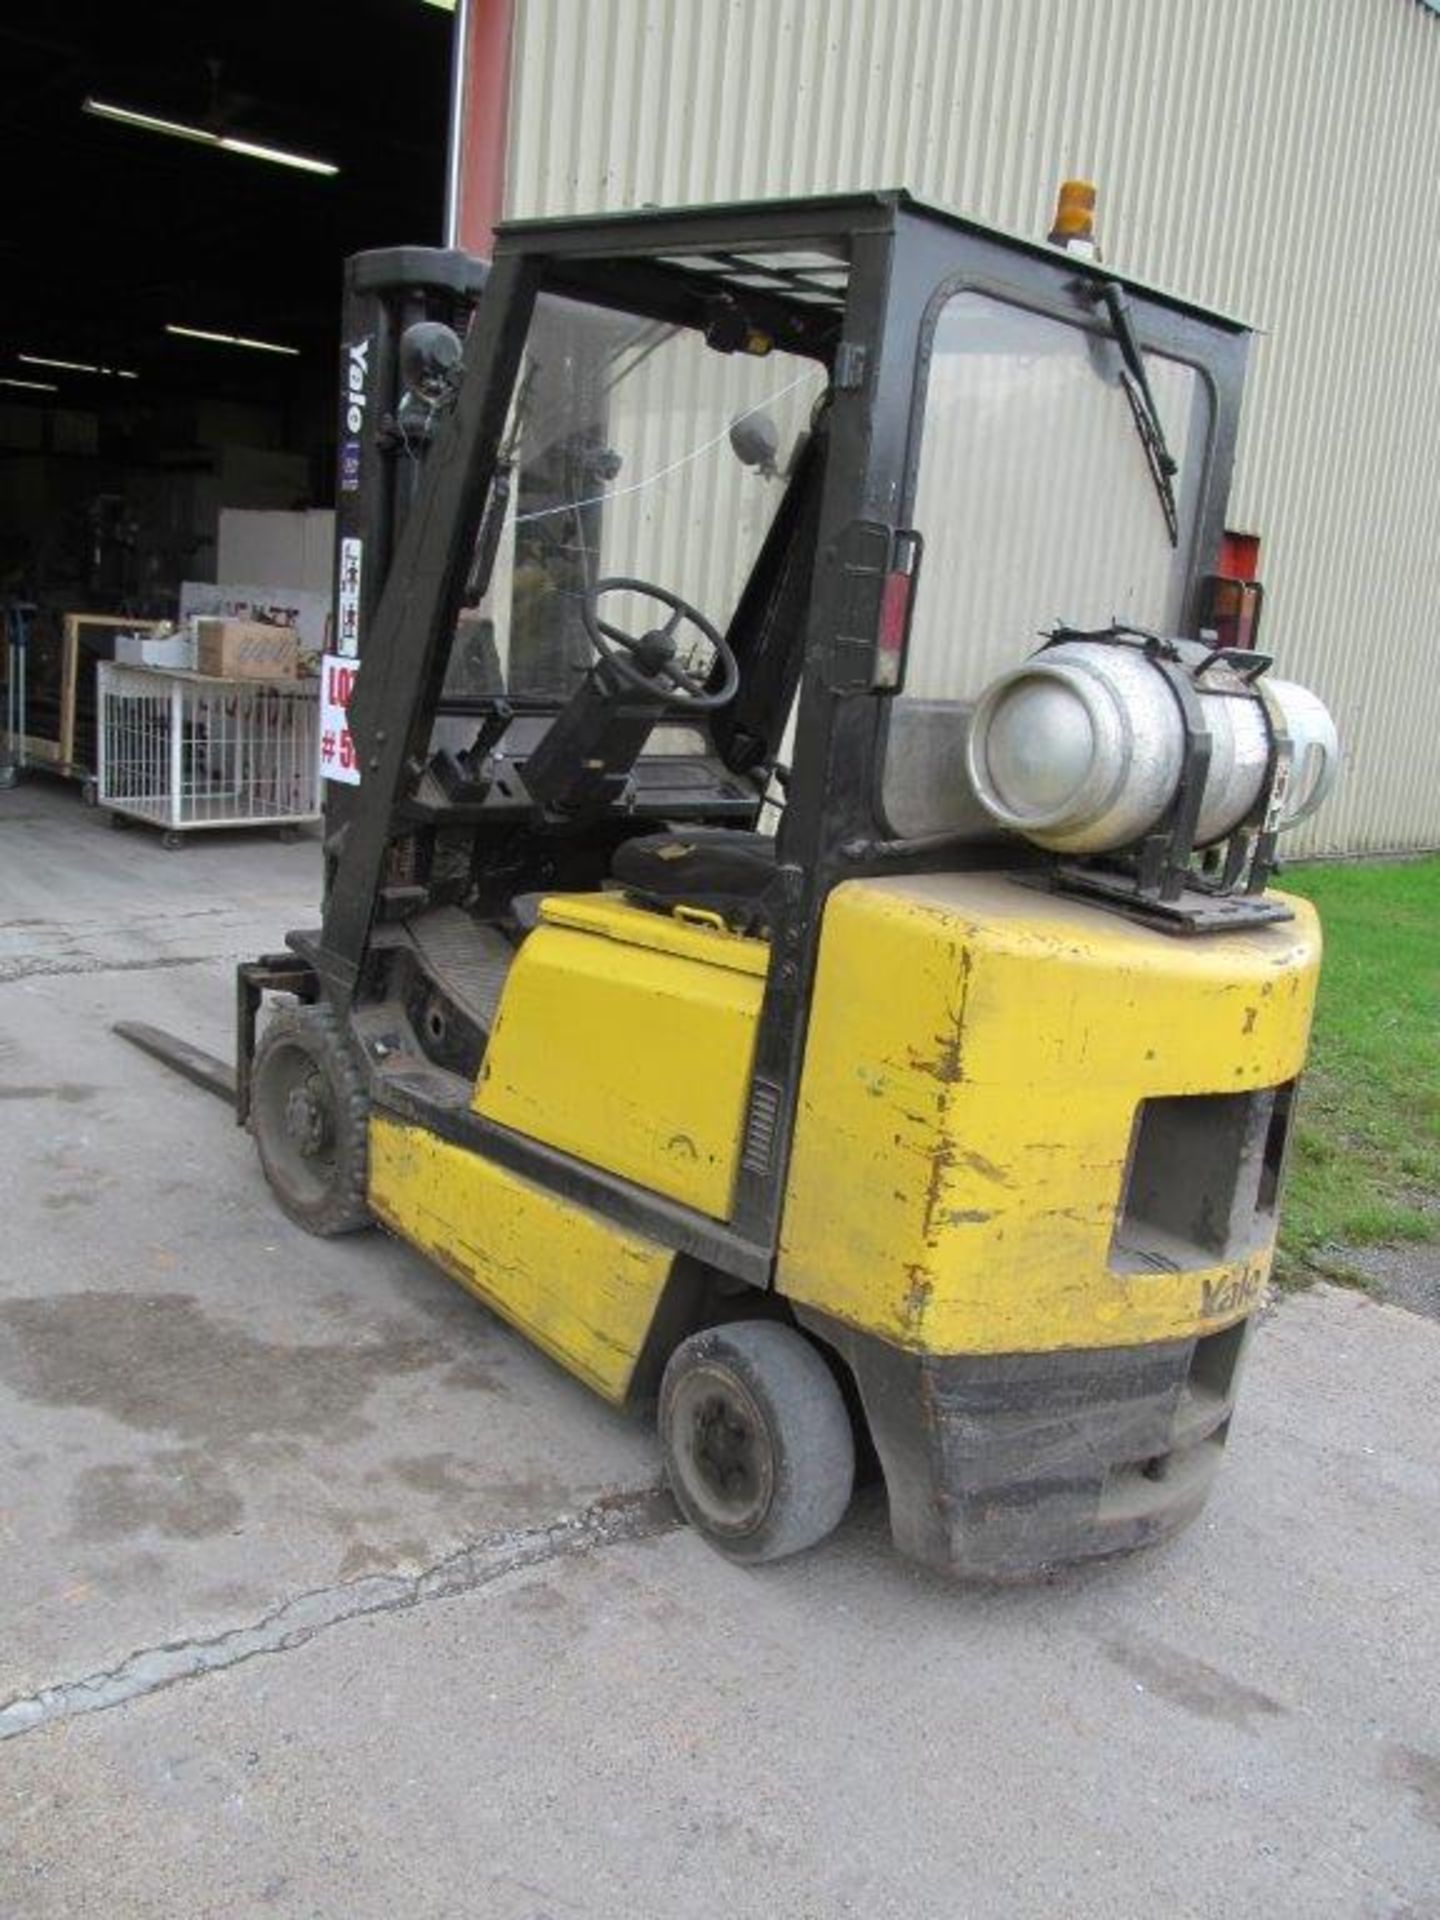 YALE PROPANE FORKLIFT MODEL: E466087, 5000 LBS CAP, INDOOR/OUTDOOR, "PROPANE TANK NOT INCLUDED" - Image 3 of 10